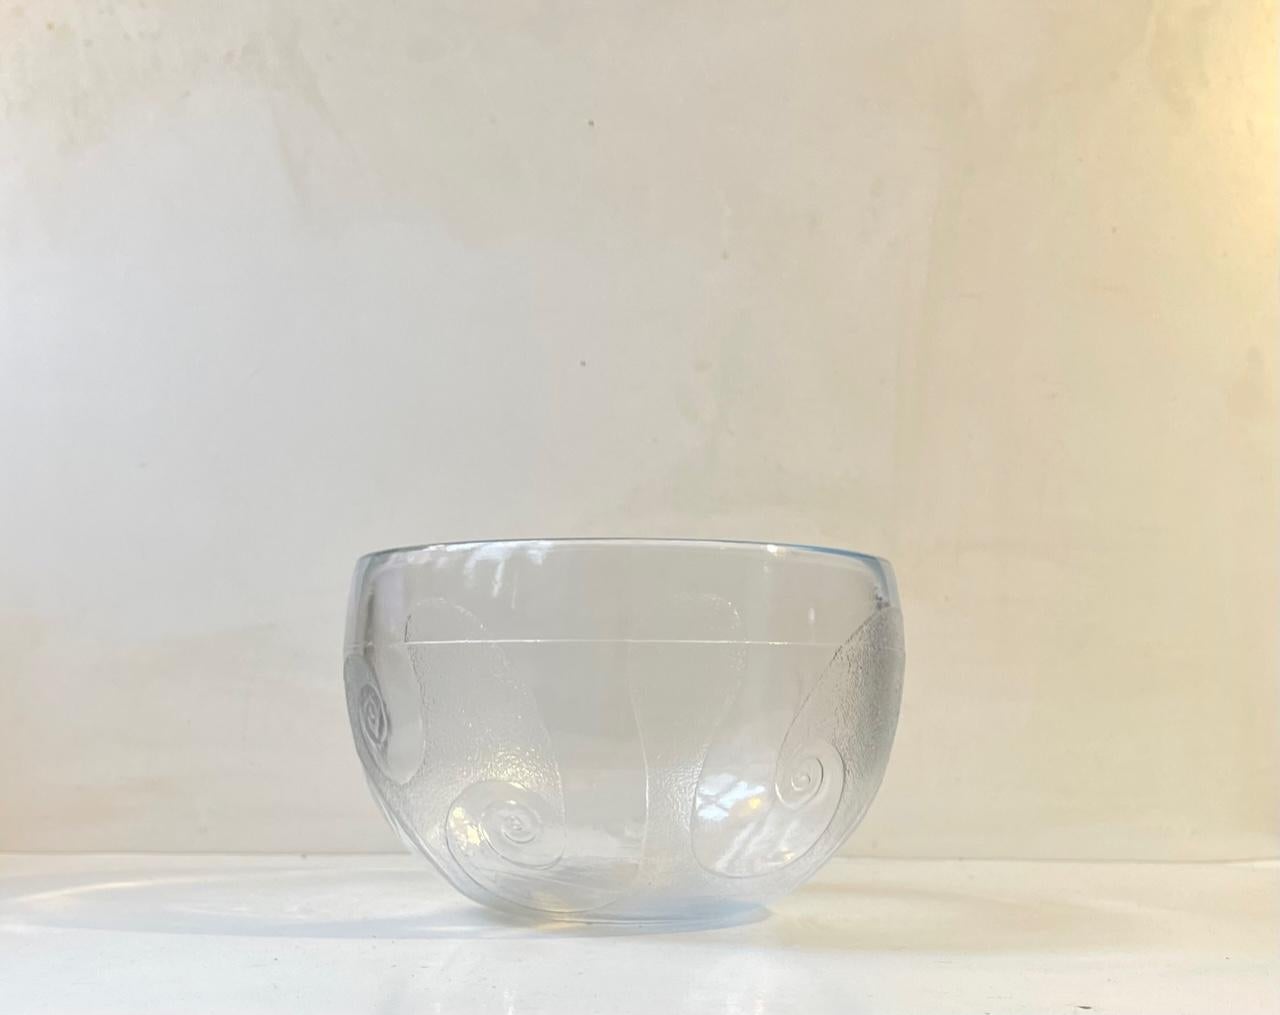 A rare centerpiece or salad bowl in cast centrifuged clear glass. Decor: tentacles or waves. It is called Glastronomi (compilation of Glass and astronomy) and it was designed by Michael Bang in 1976 and made at Holmegaard in Denmark until 1977.